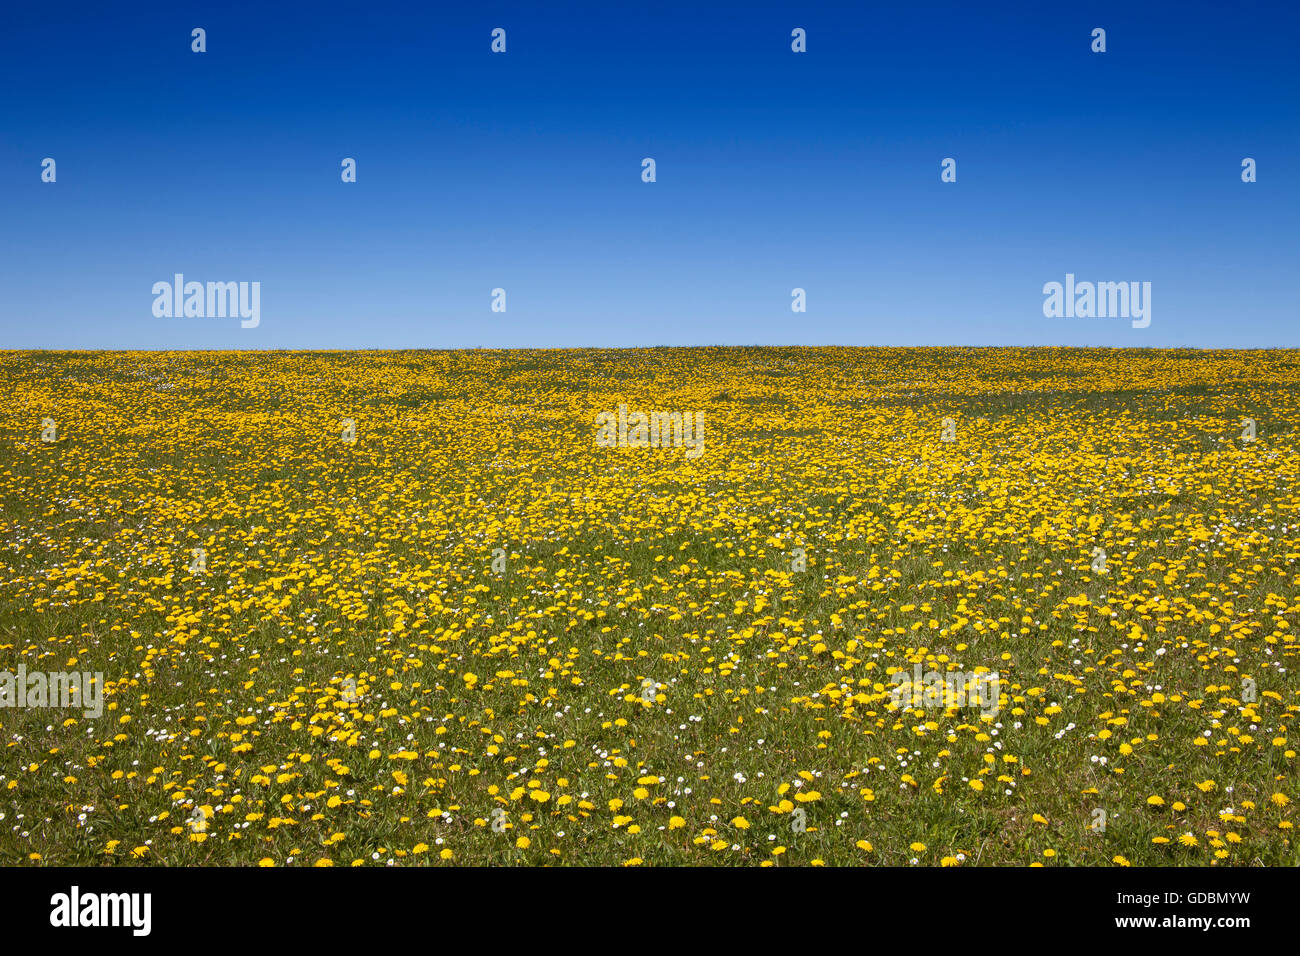 Meadow with dandelions (Taraxacum officinale) in spring, Schleswig Holstein, Sylt, Germany, Europe Stock Photo